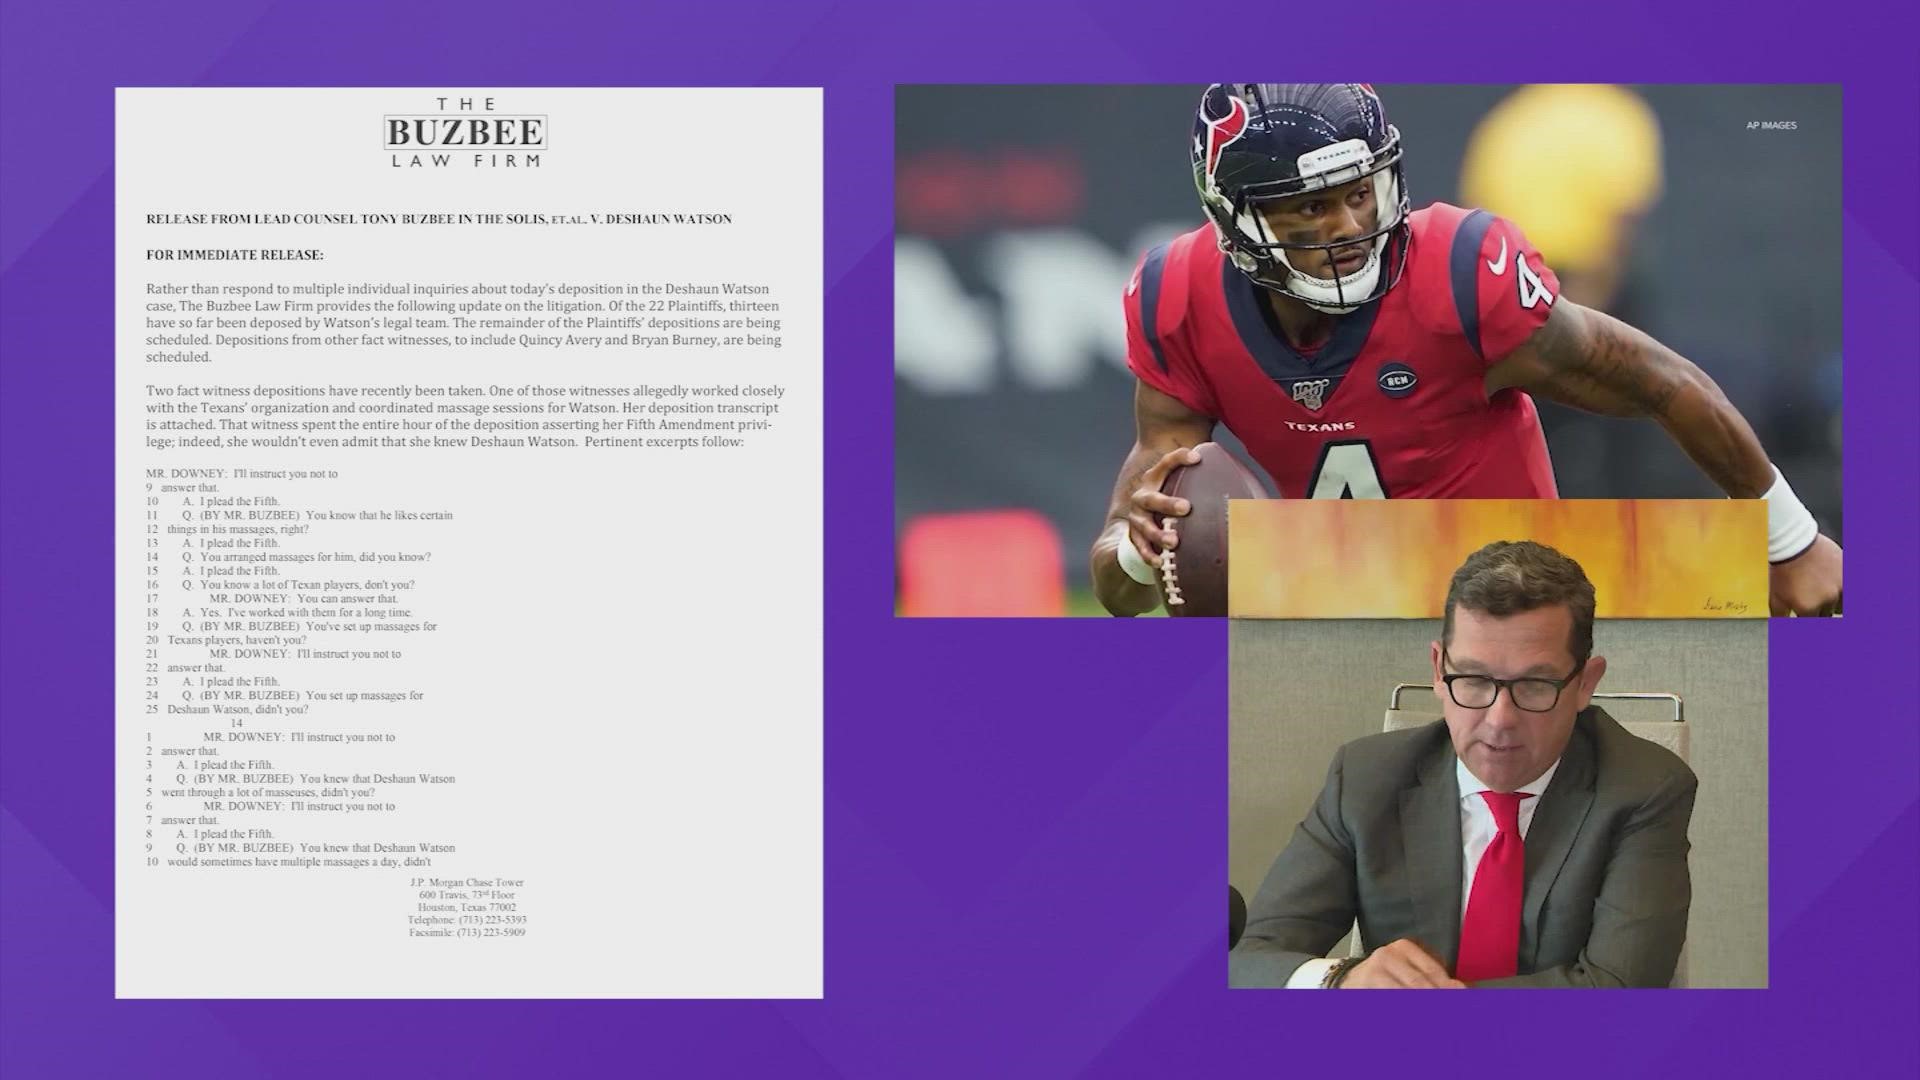 Tony Buzbee revealed details of a deposition in a news release which includes excerpts of testimony from a woman who allegedly worked closely with the Texans.